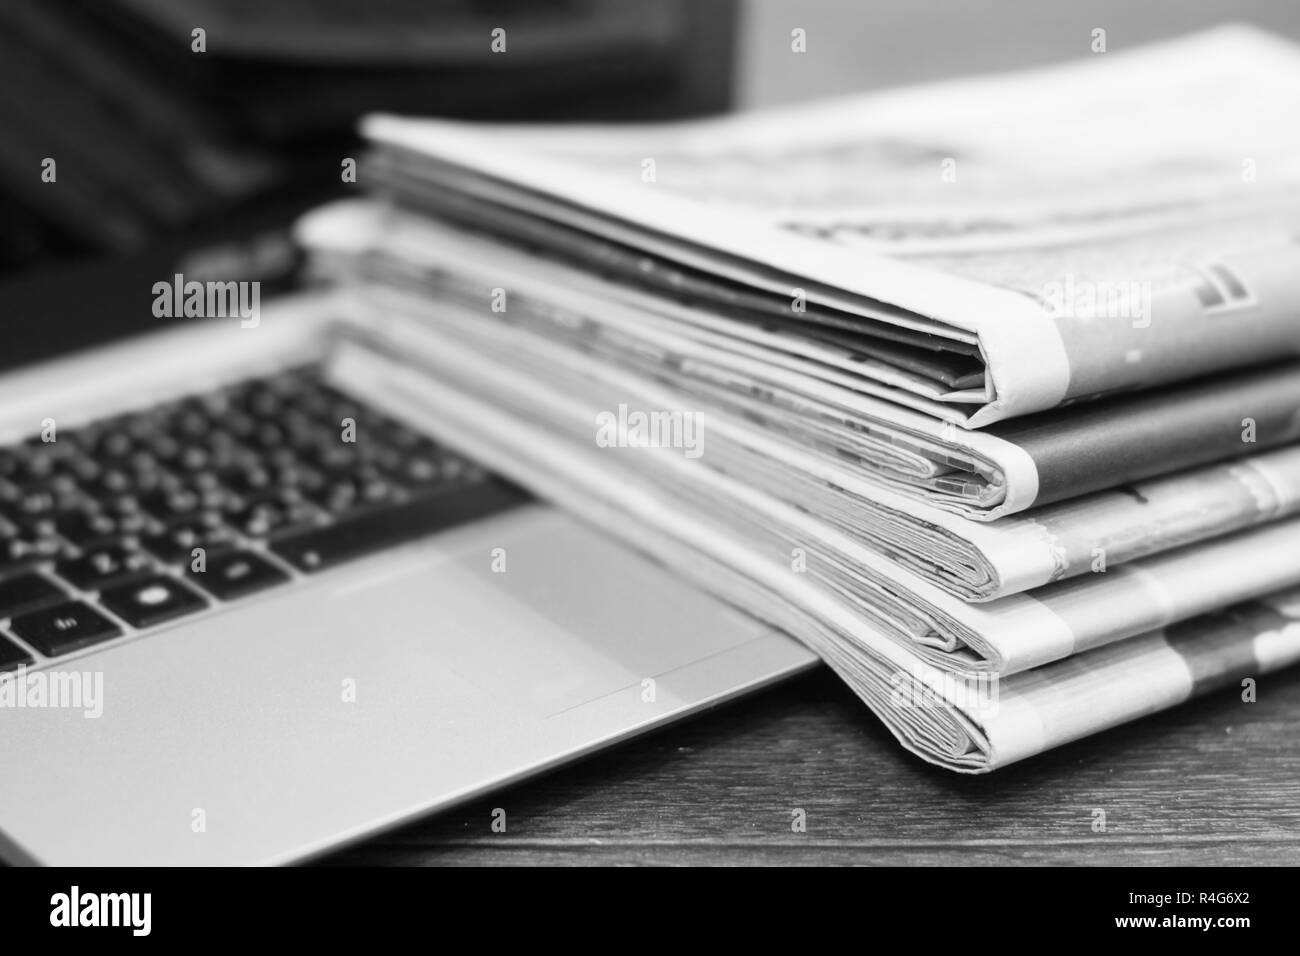 Newspapers and laptop. Pile of daily papers with news on computer. Pages with headlines, articles folded and stacked on keypad of electronic device Stock Photo